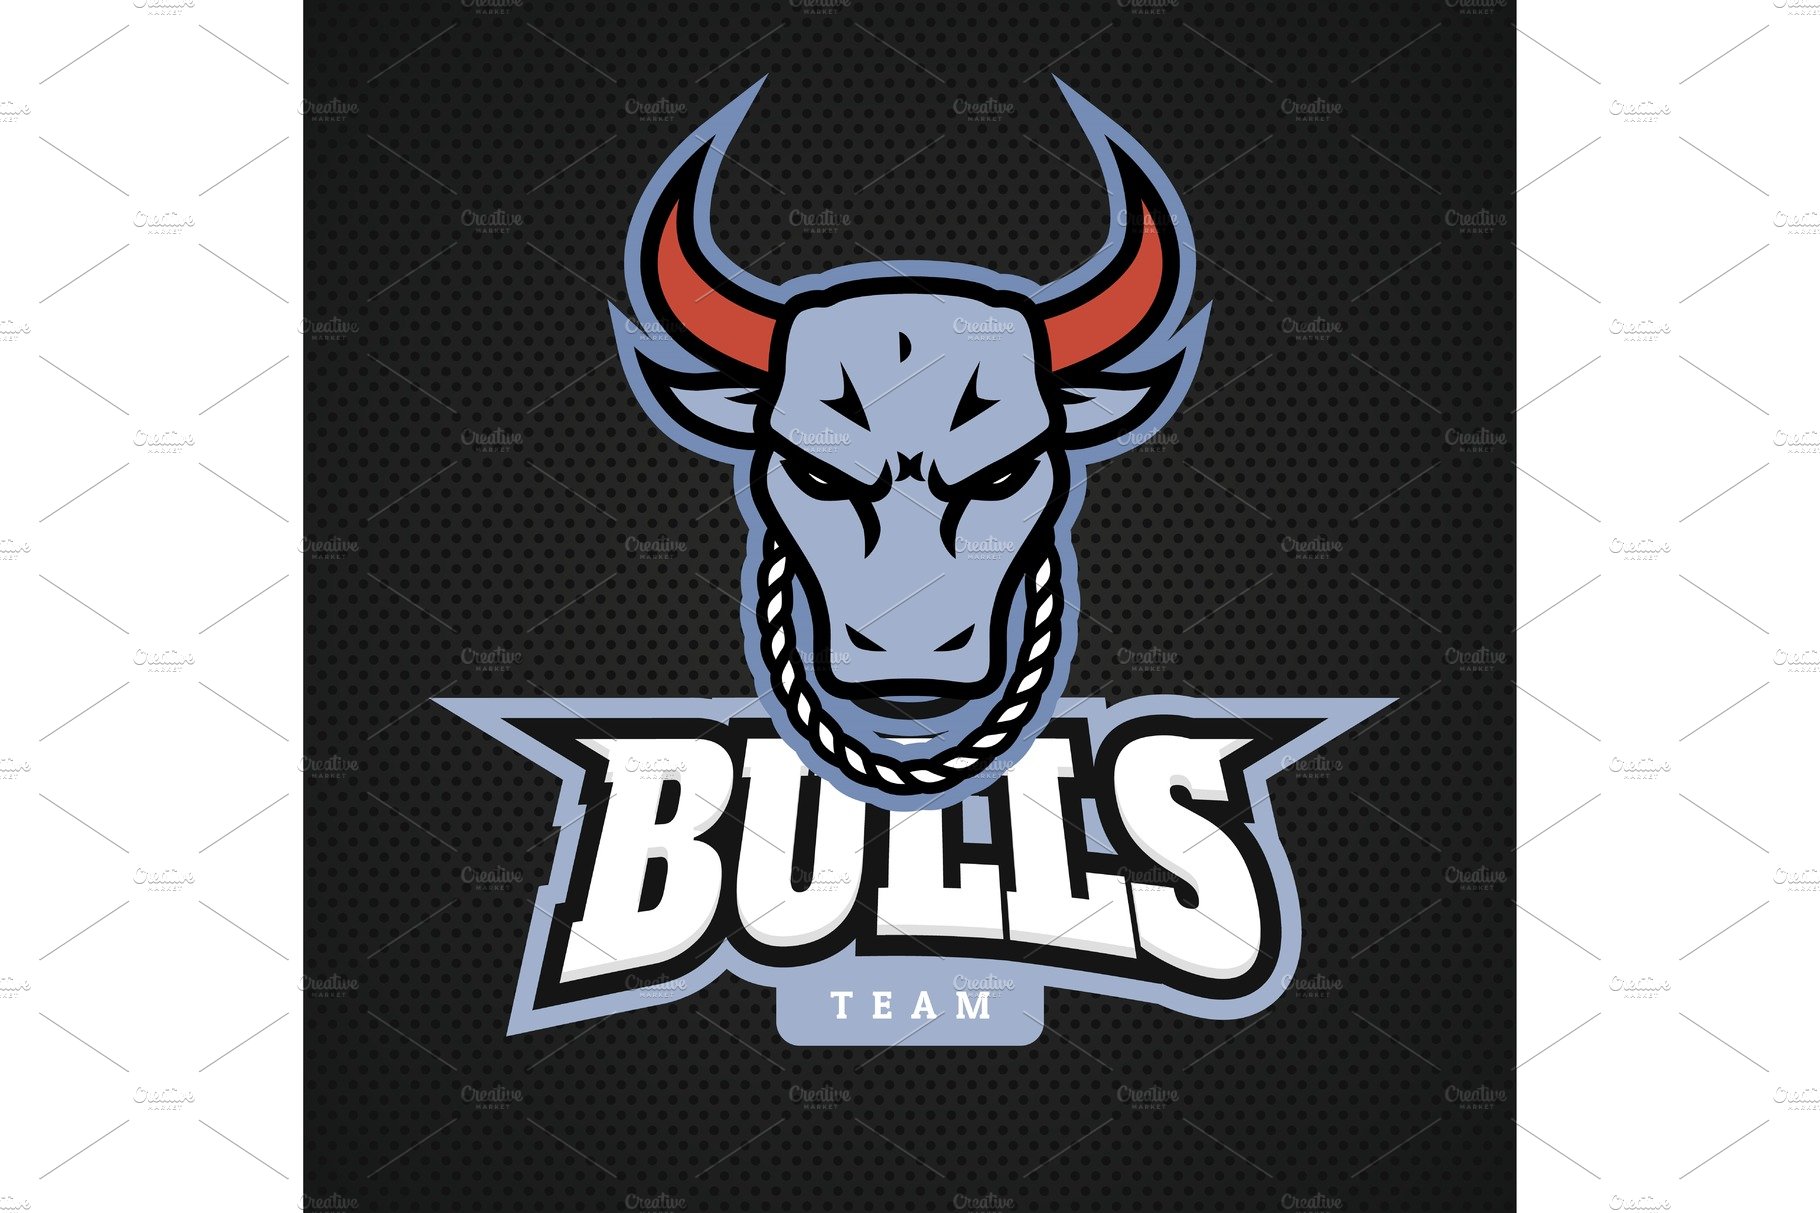 Head bull logo icon designs with cover image.